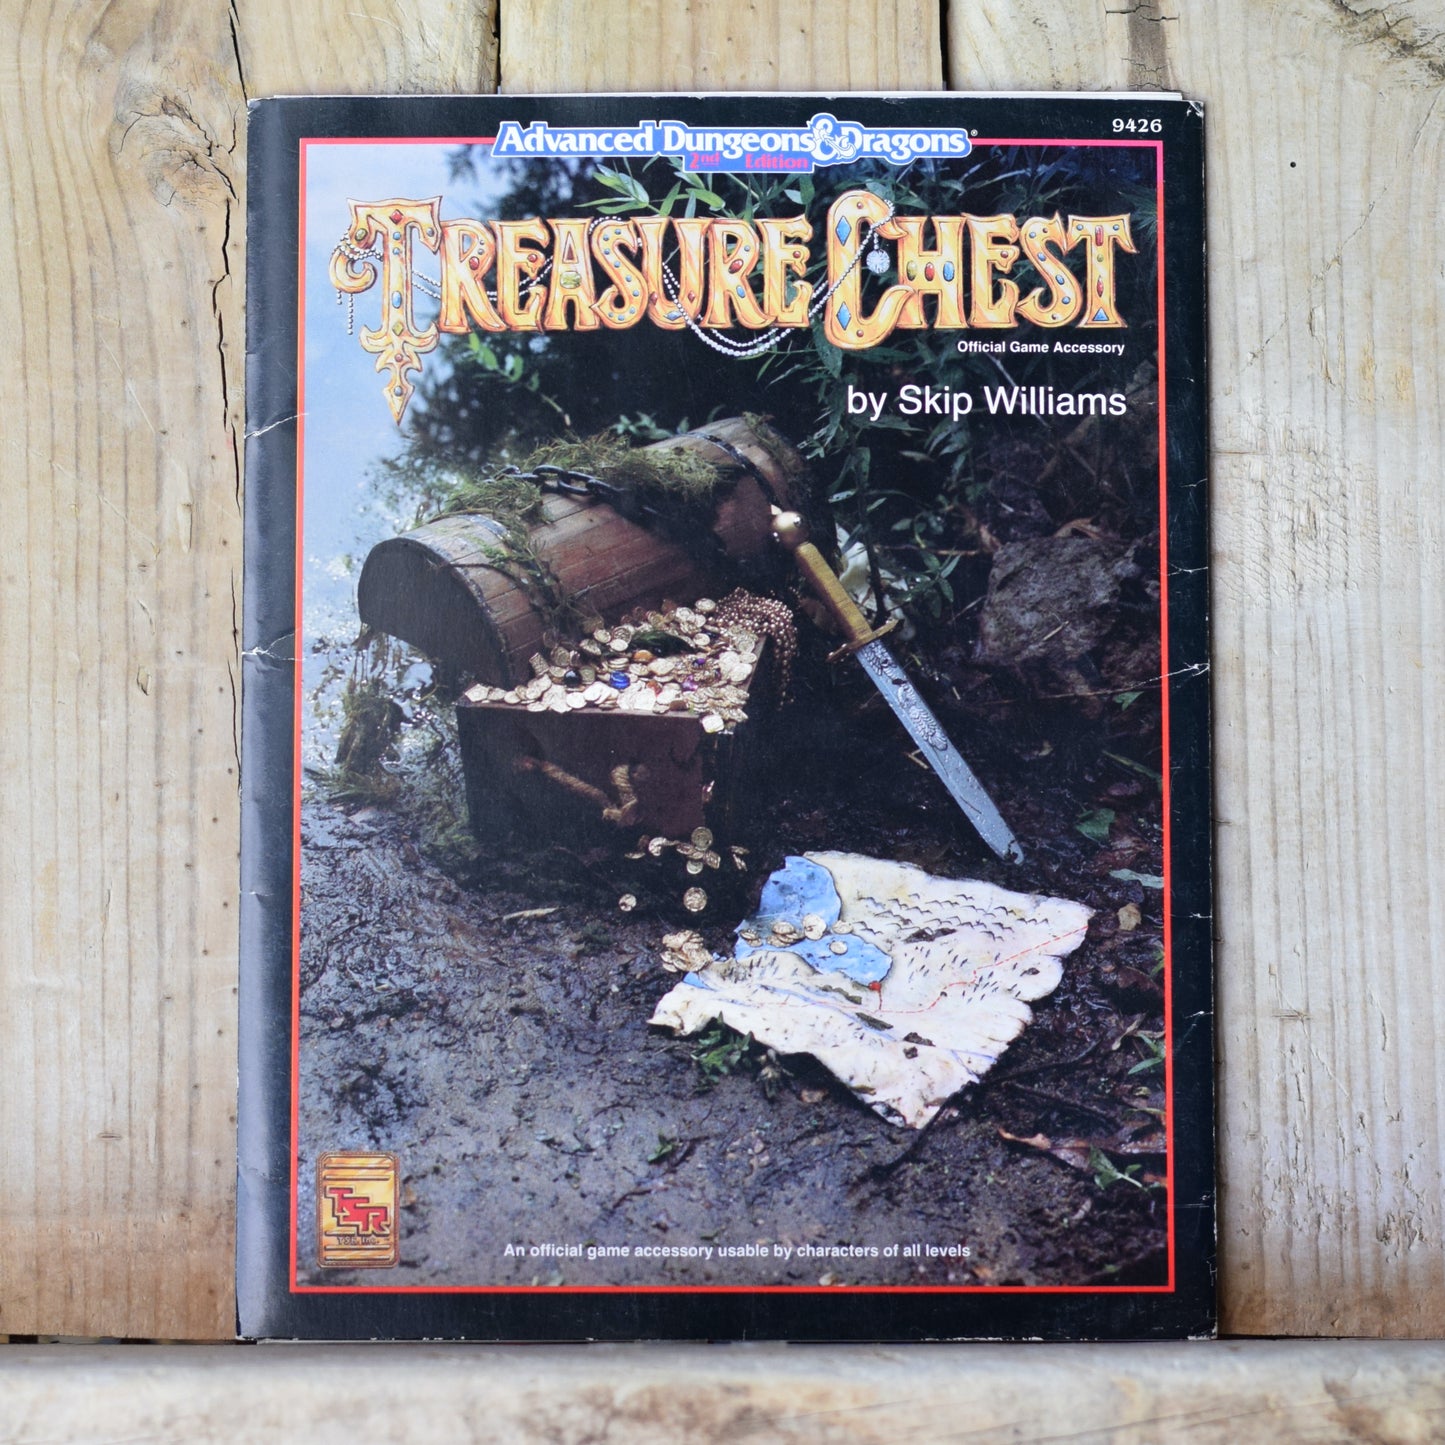 Vintage Dungeons and Dragons RPG Book: AD&D 2e Treasure Chest by Skip Williams Official Adventure